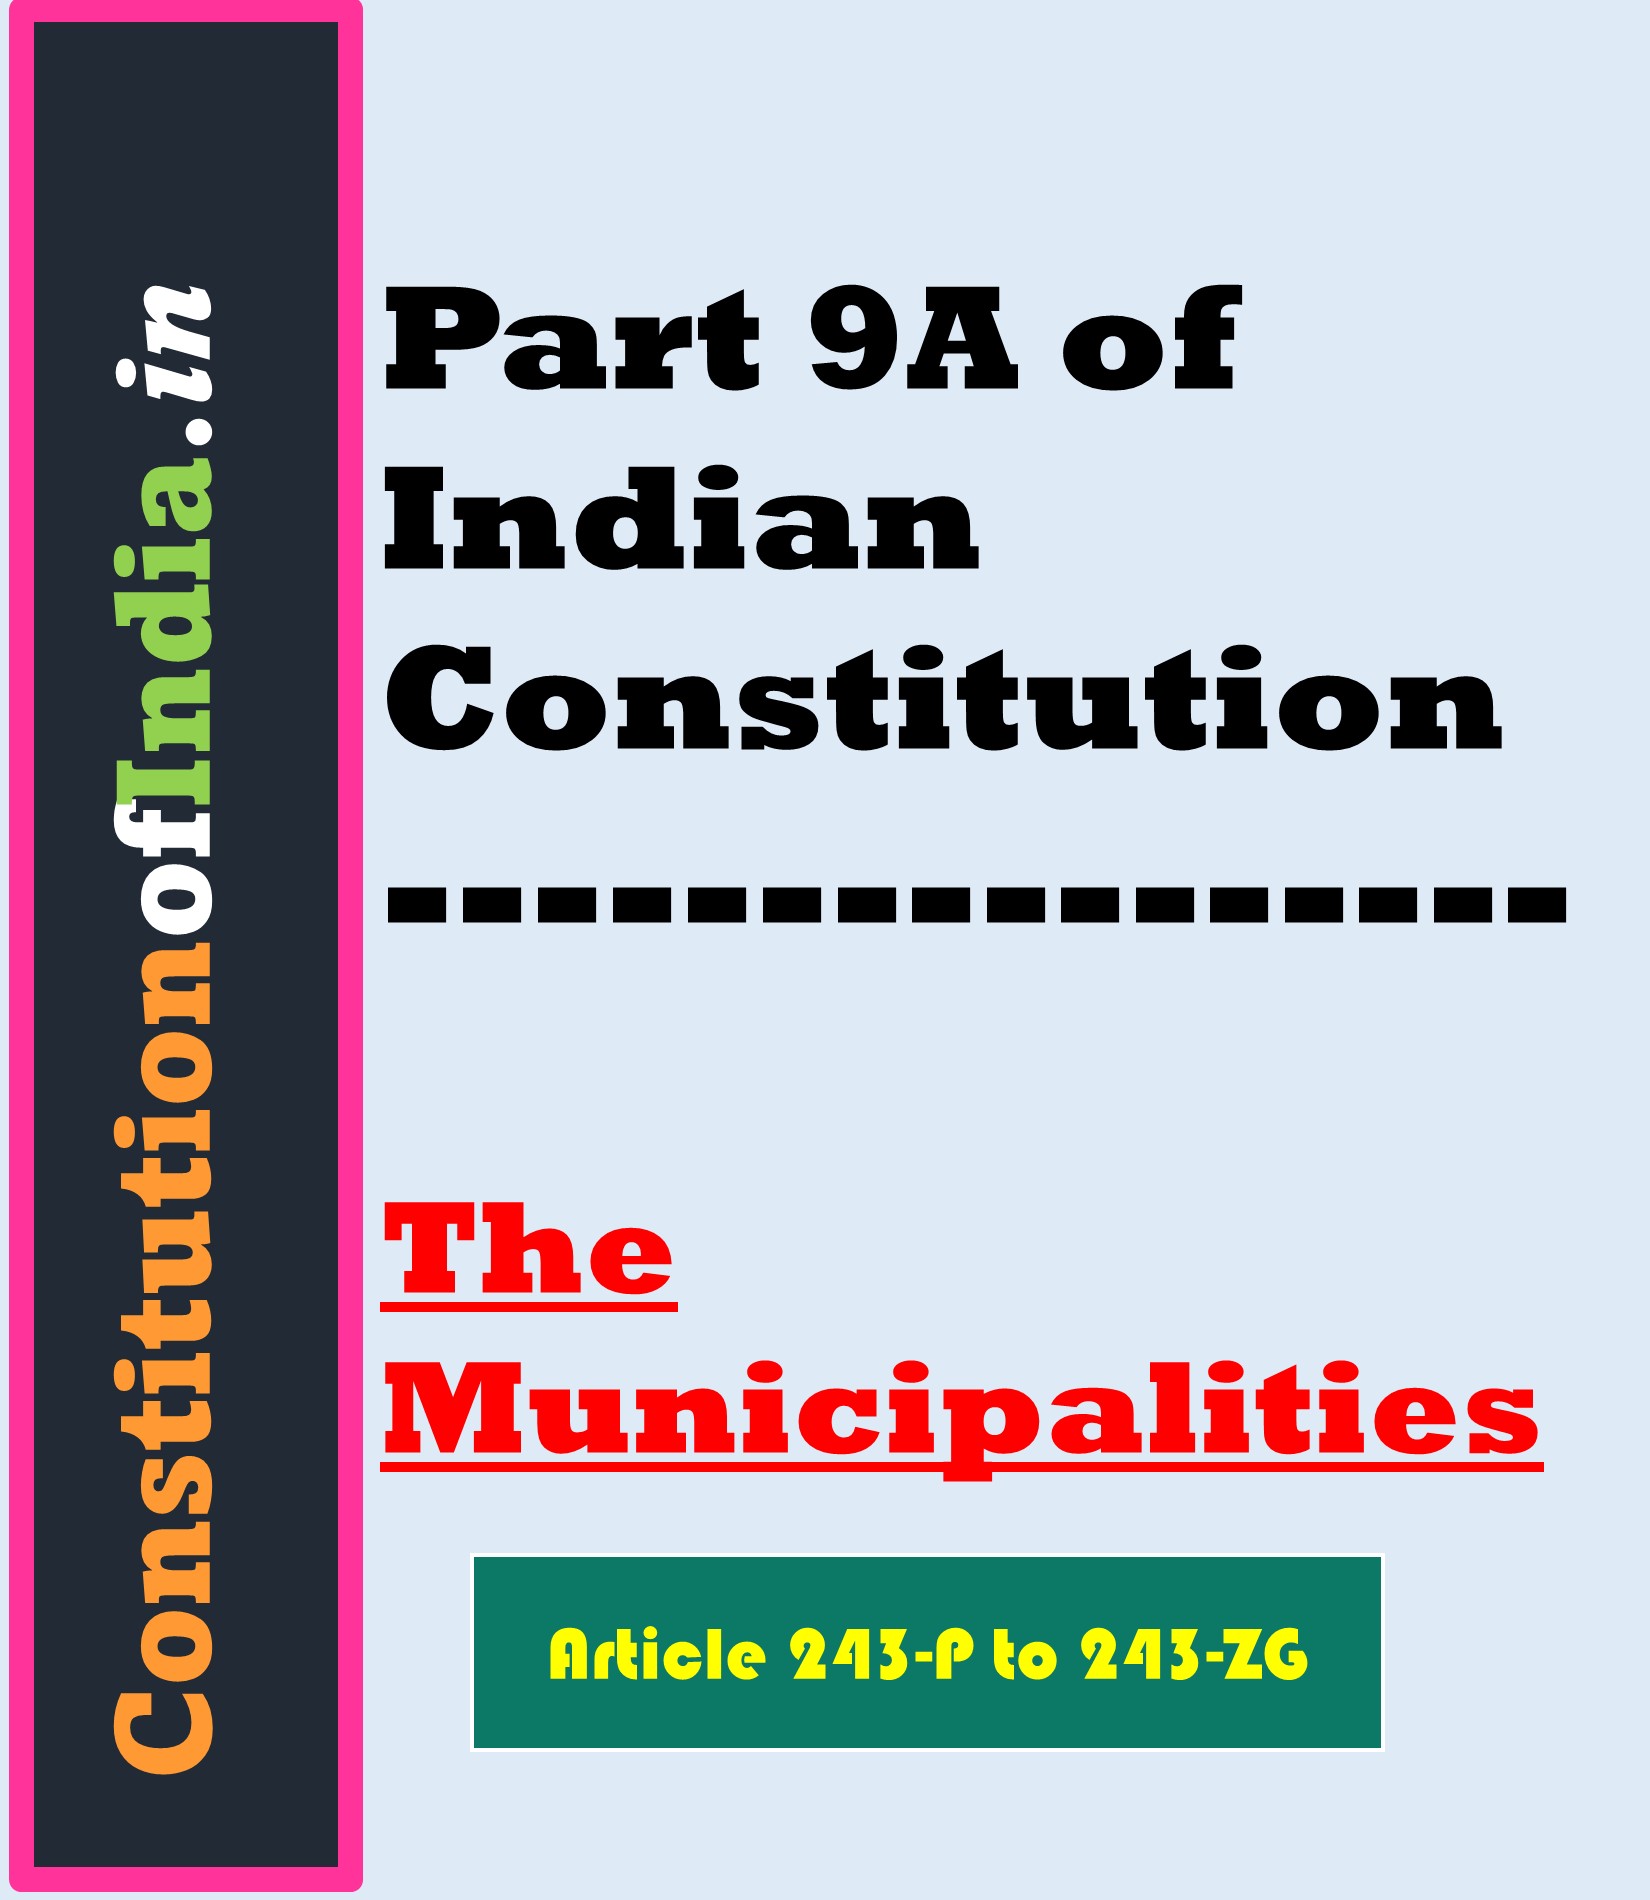 Part 9a of Indian Constitution 